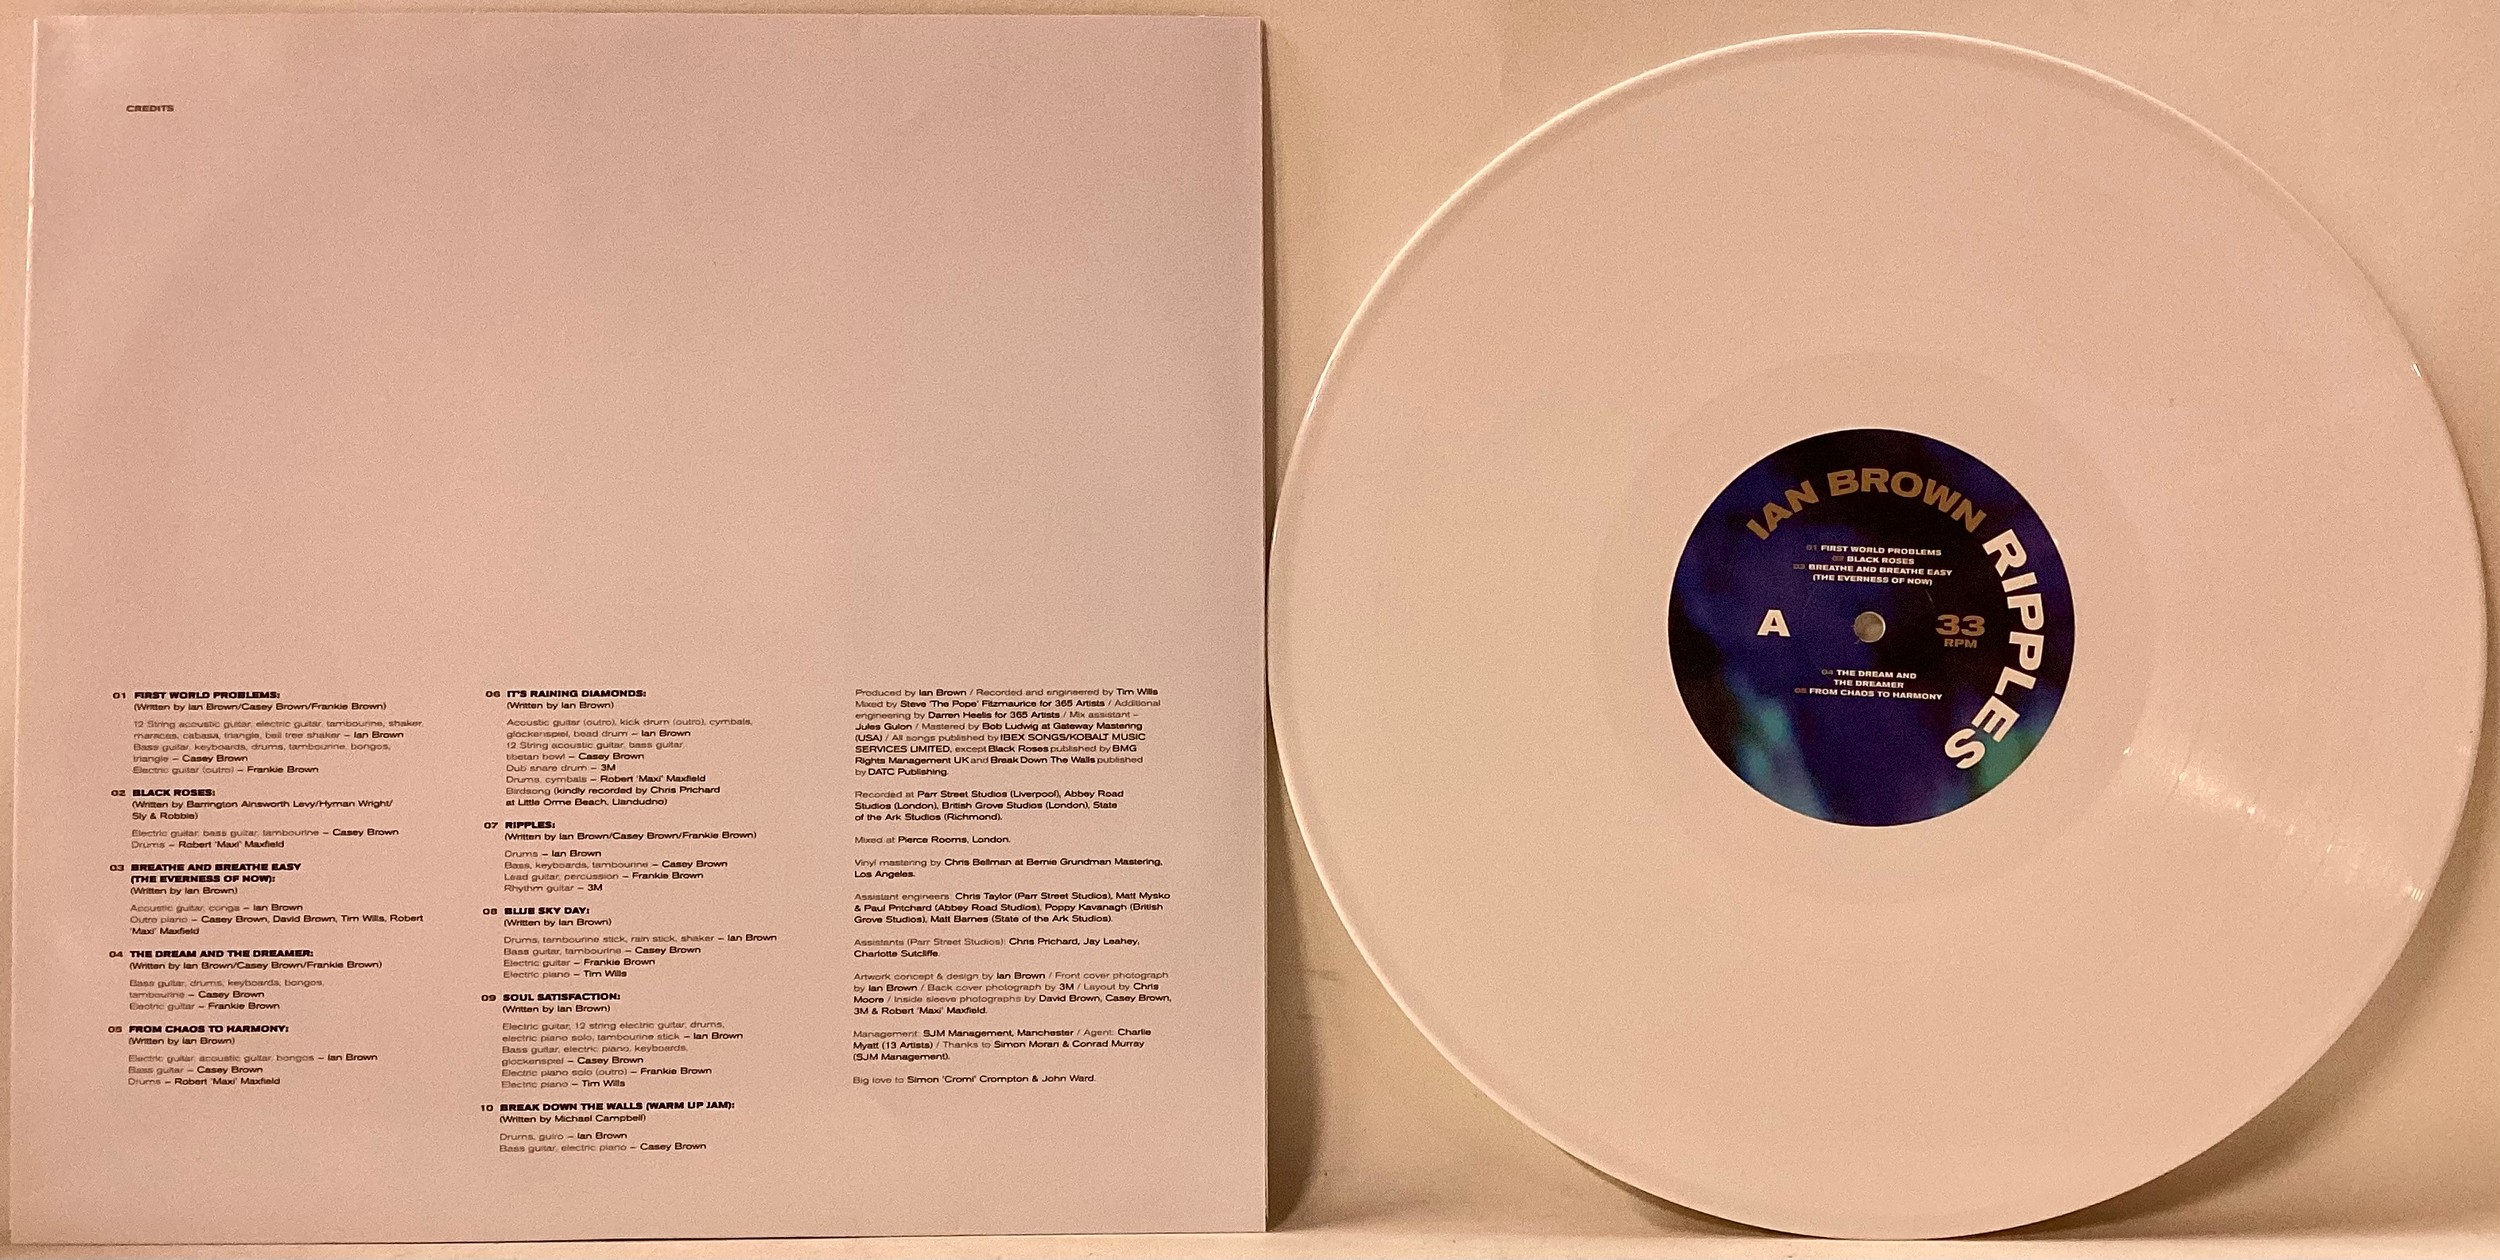 WHITE VINYL ALBUM BY IAN BROWN ‘RIPPLES’. A Polydor release from 2019 found here on white vinyl - Image 3 of 3